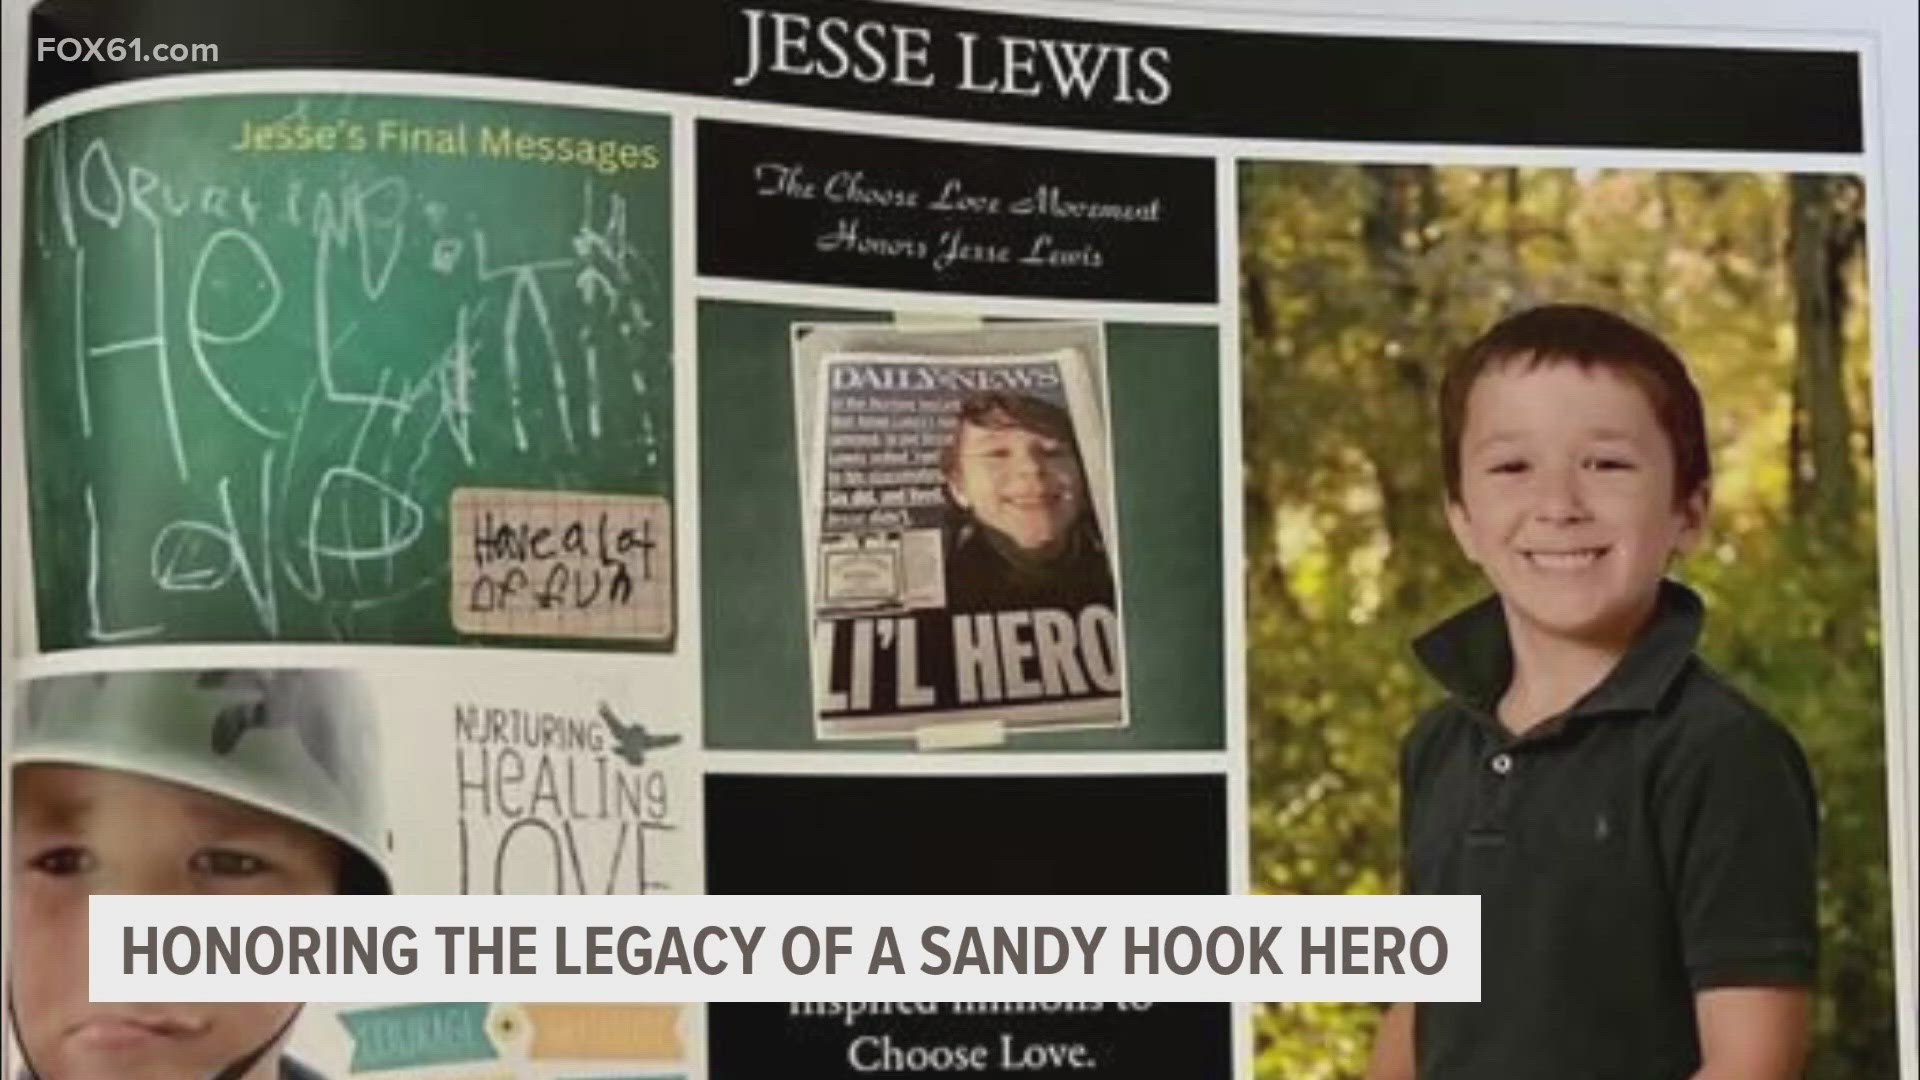 Six-year-old Jesse Lewis saved nine classmates on the day of the Sandy Hook shooting in 2012, yelling for them to run as the shooter reloaded before he was killed.